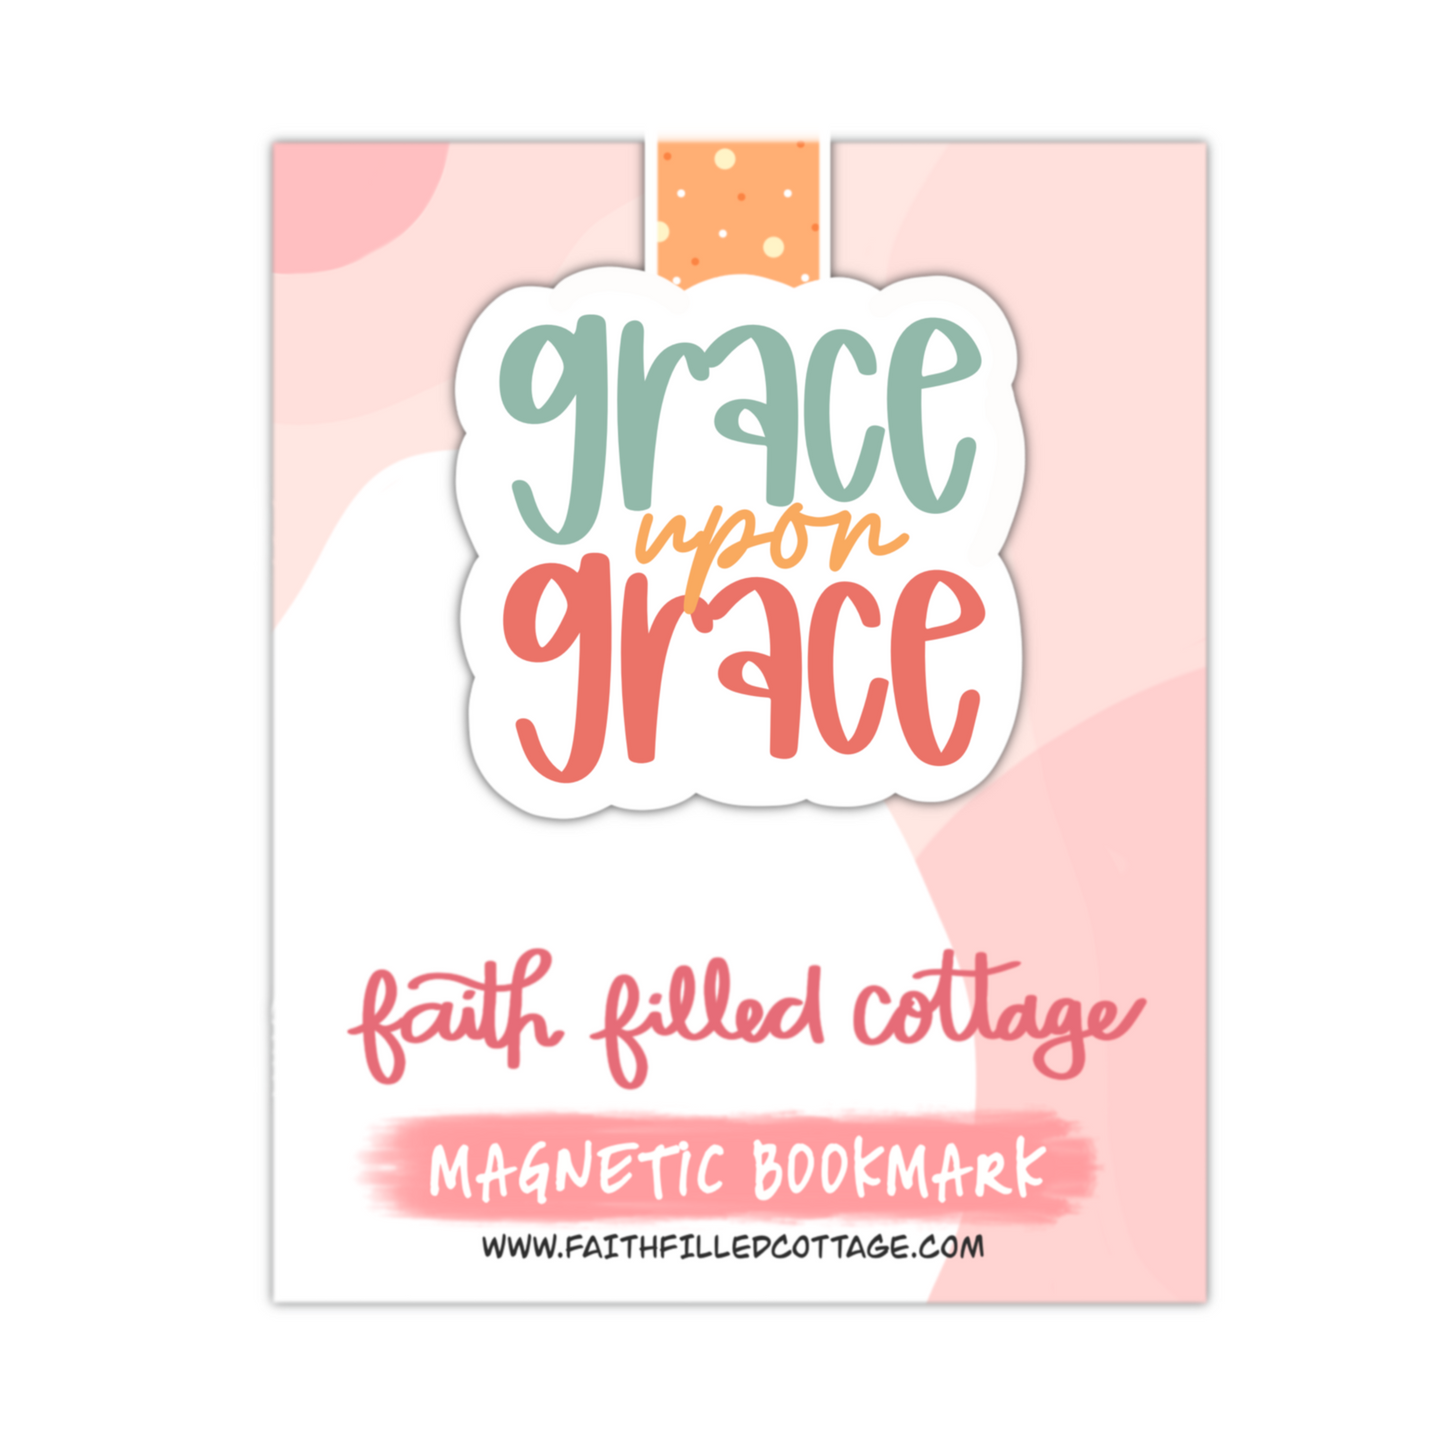 Grace Upon Grace (magnetic bookmark)